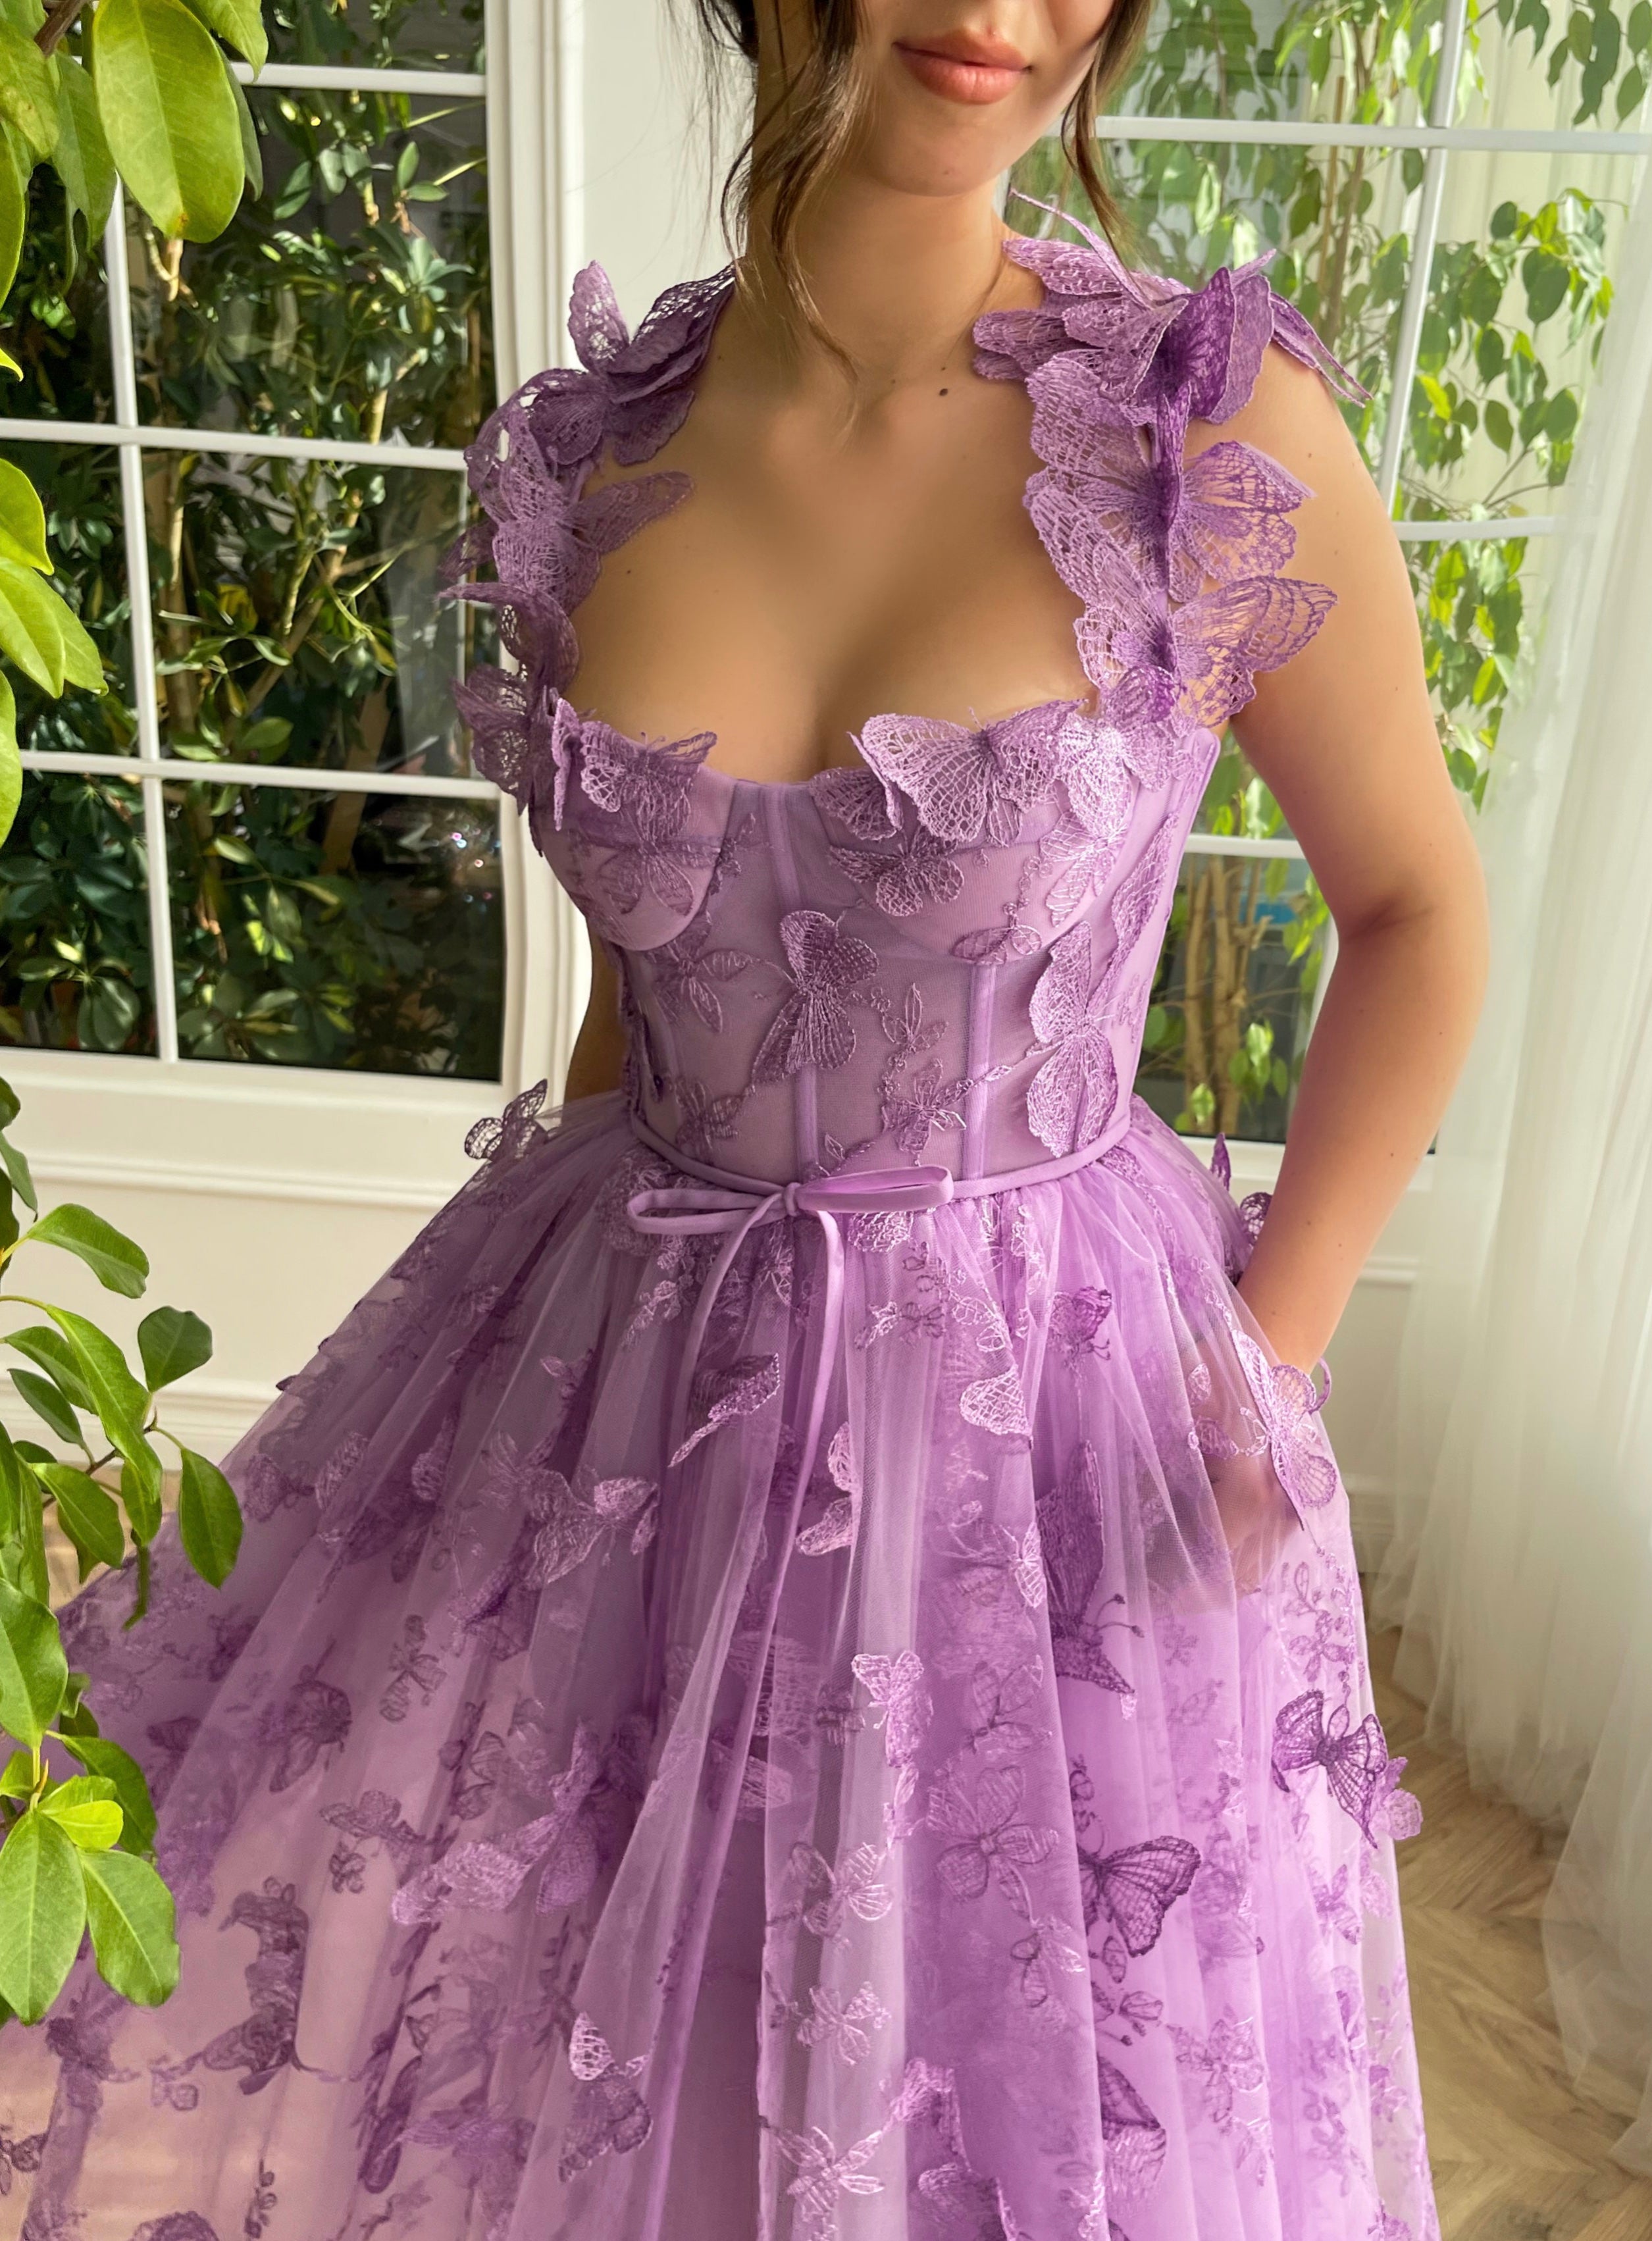 Purple midi dress with straps and embroidered butterflies